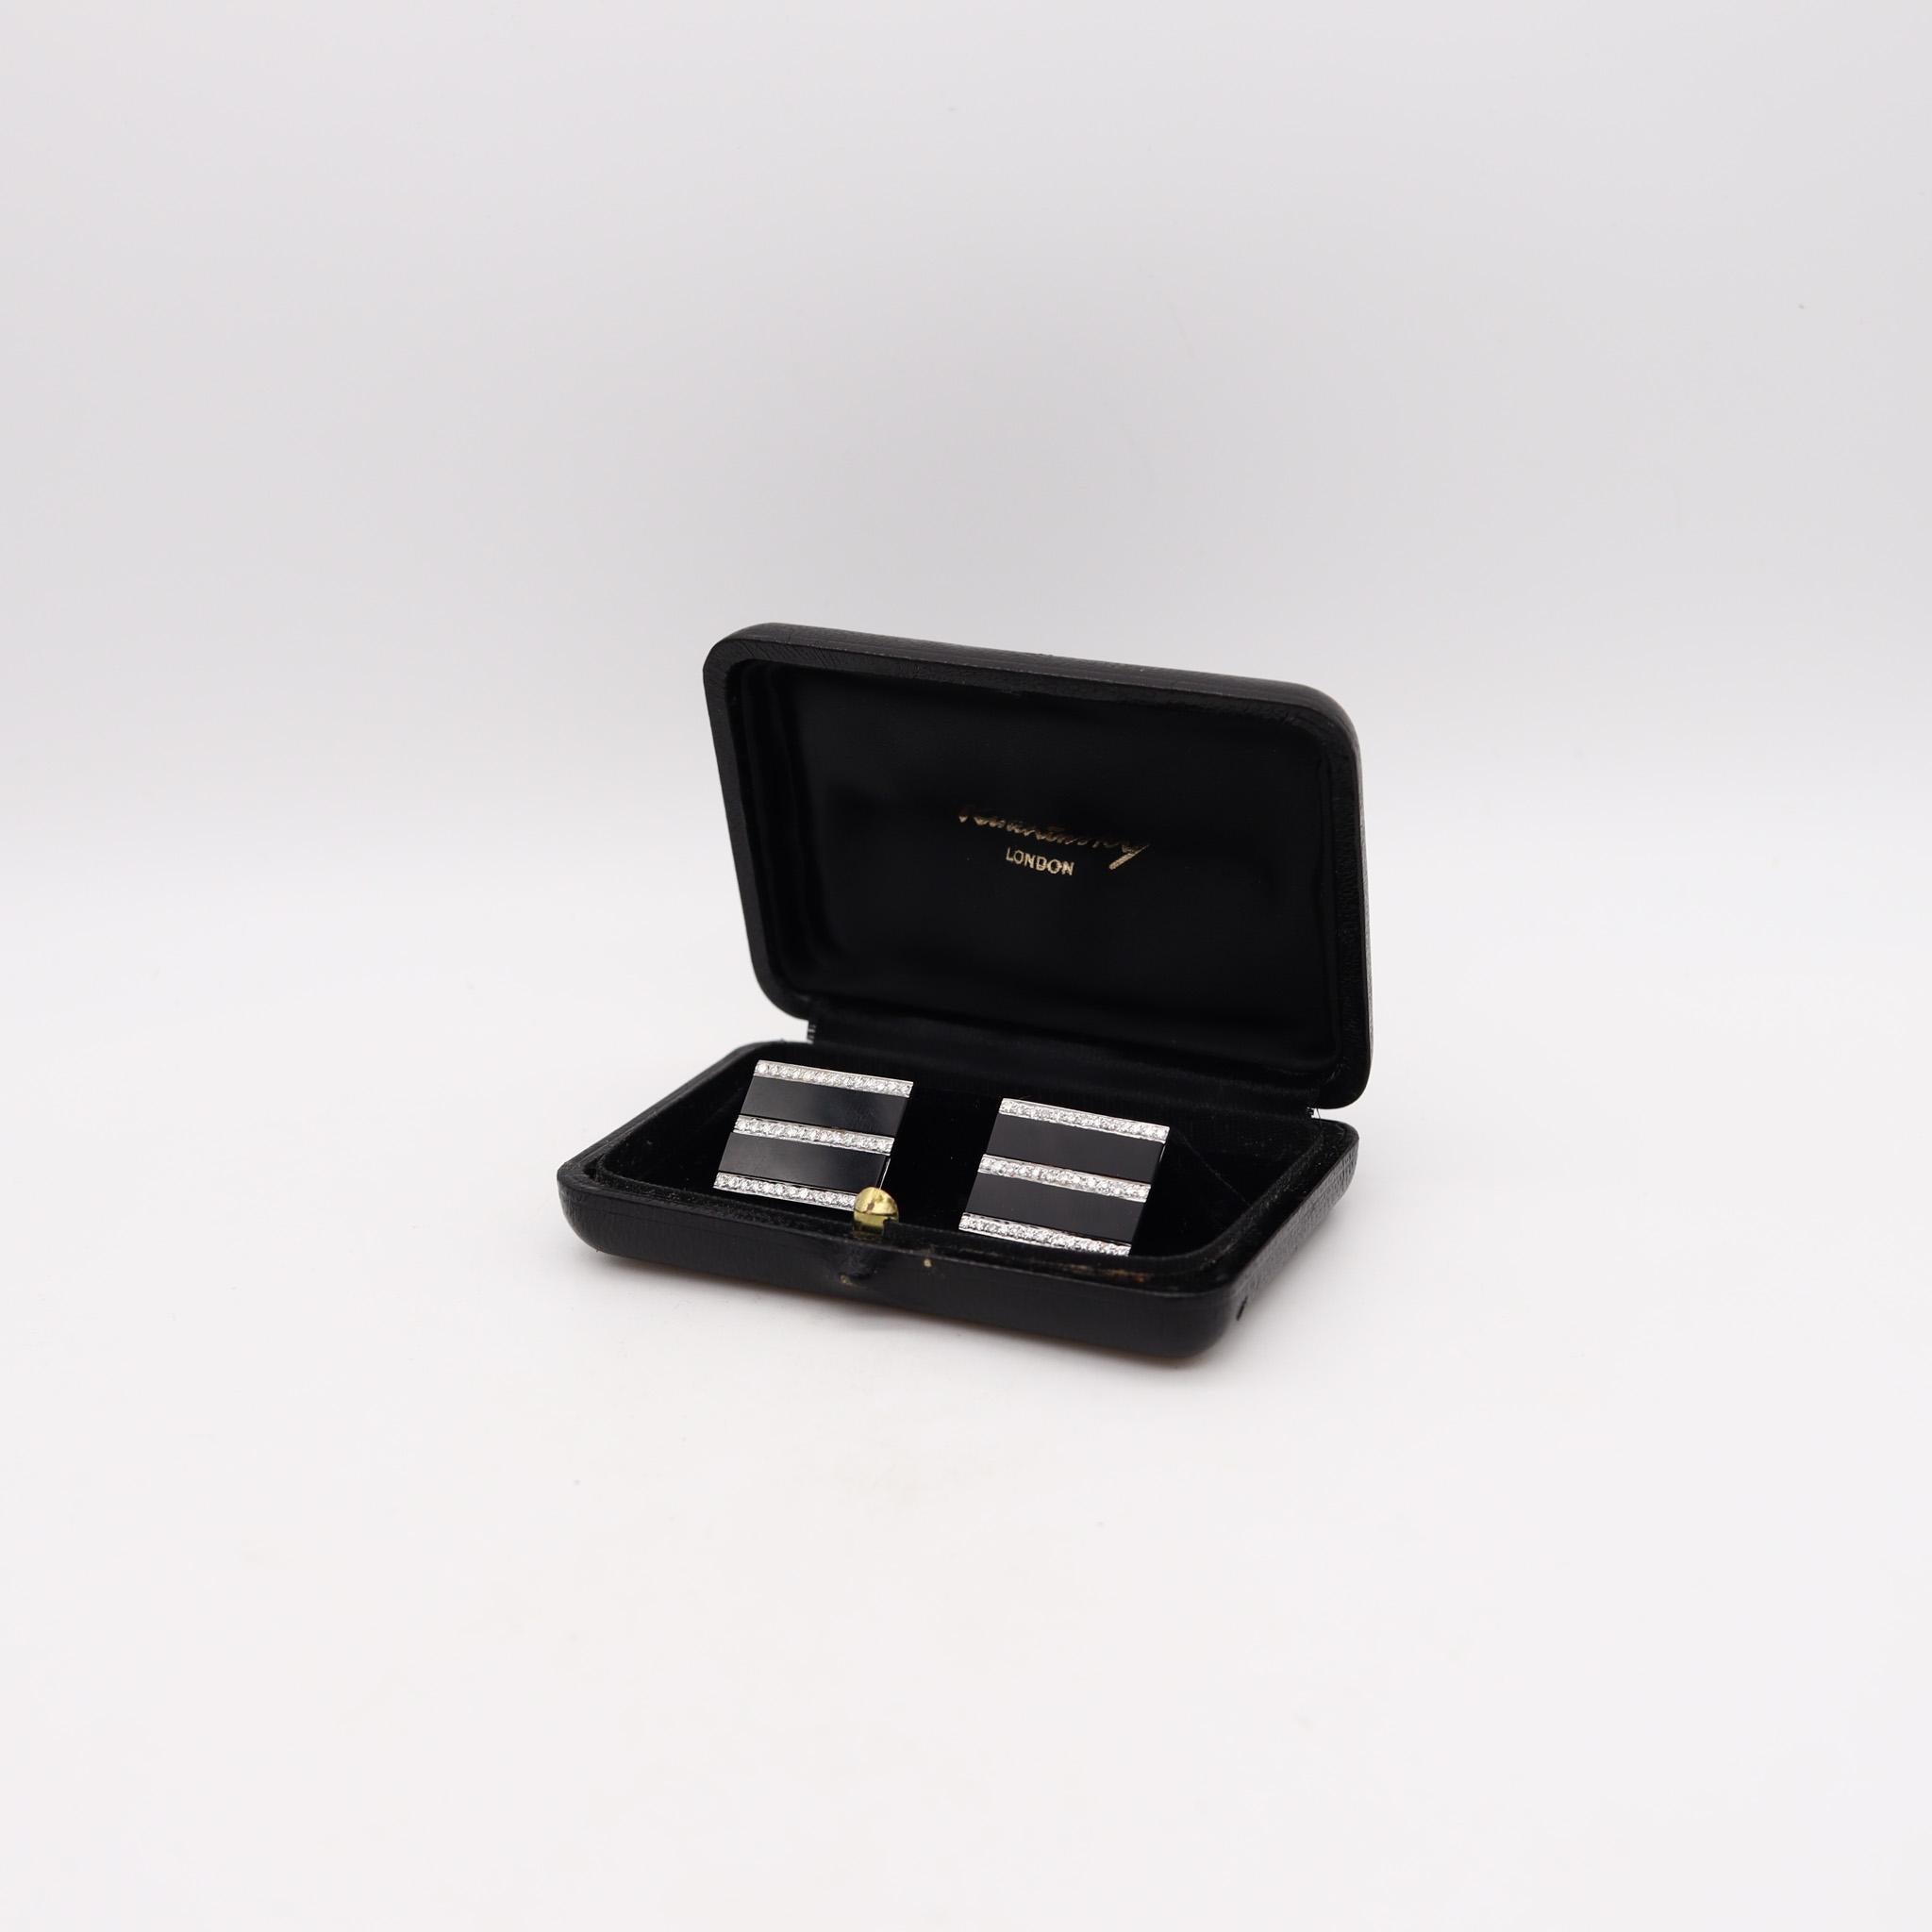 Pair of cufflinks designed by Kutchinsky.

Exceptional pair of cufflinks, created in London England by the jewelry house of Kutchinsky, back in the 1975. These black and white cufflinks are very elegant and should fit any wardrobe. Were crafted in